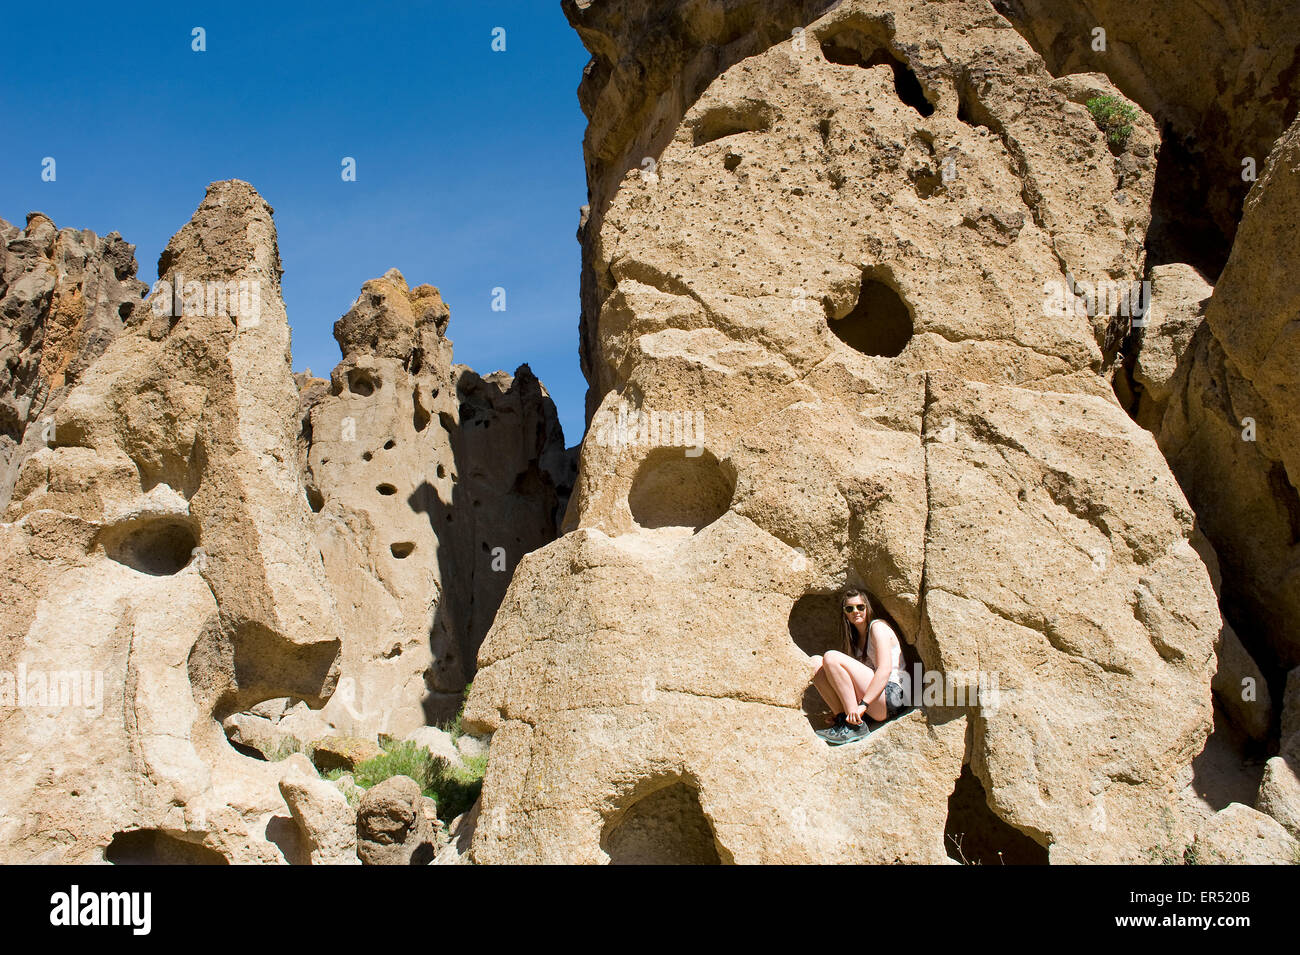 Girl Climbing in Hole in the Wall Canyon, Mojave National Preserve located in the Mojave Desert of California, USA. Stock Photo